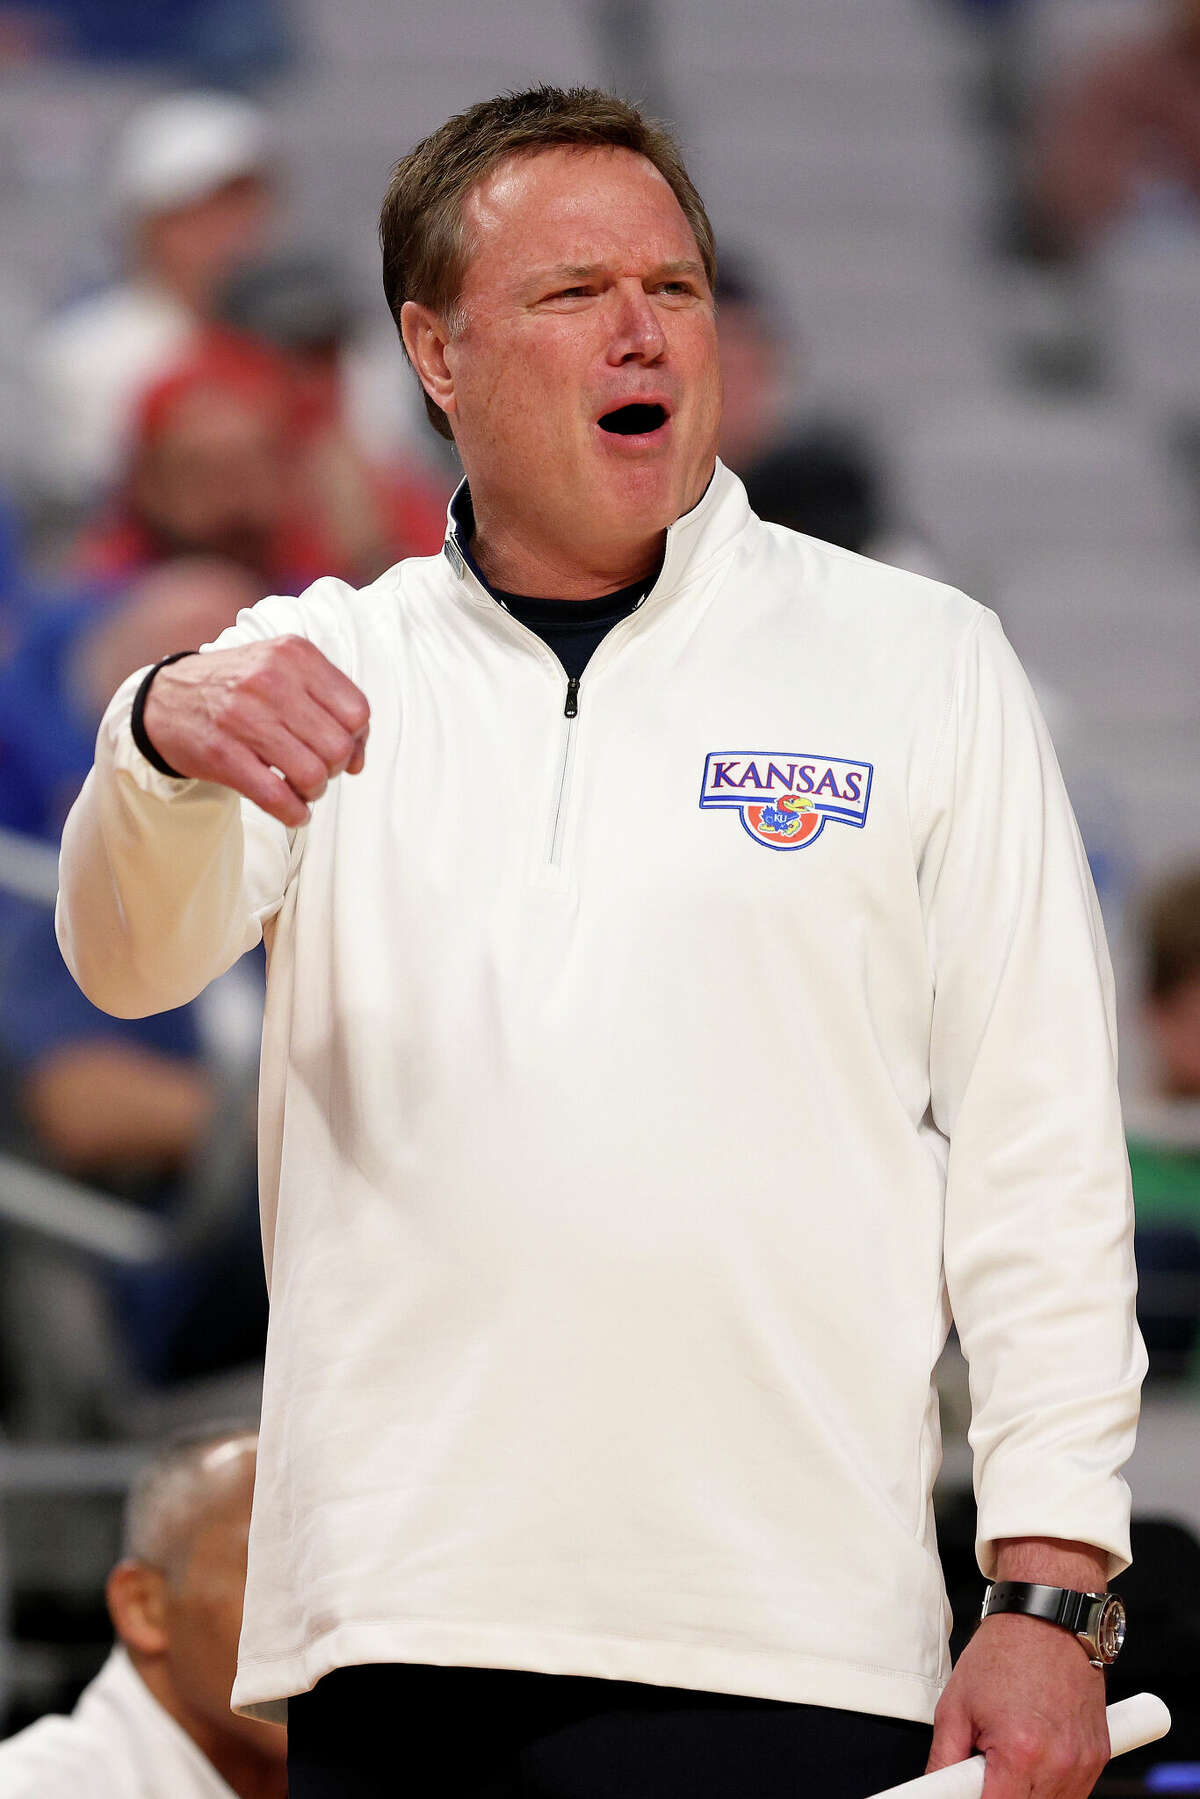 FORT WORTH, TEXAS - MARCH 17: Head coach Bill Self of the Kansas Jayhawks looks on against the Texas Southern Tigers during the second half in the first round of the 2022 NCAA Men's Basketball Tournament at Dickies Arena on March 17, 2022 in Fort Worth, Texas. (Photo by Tom Pennington/Getty Images)